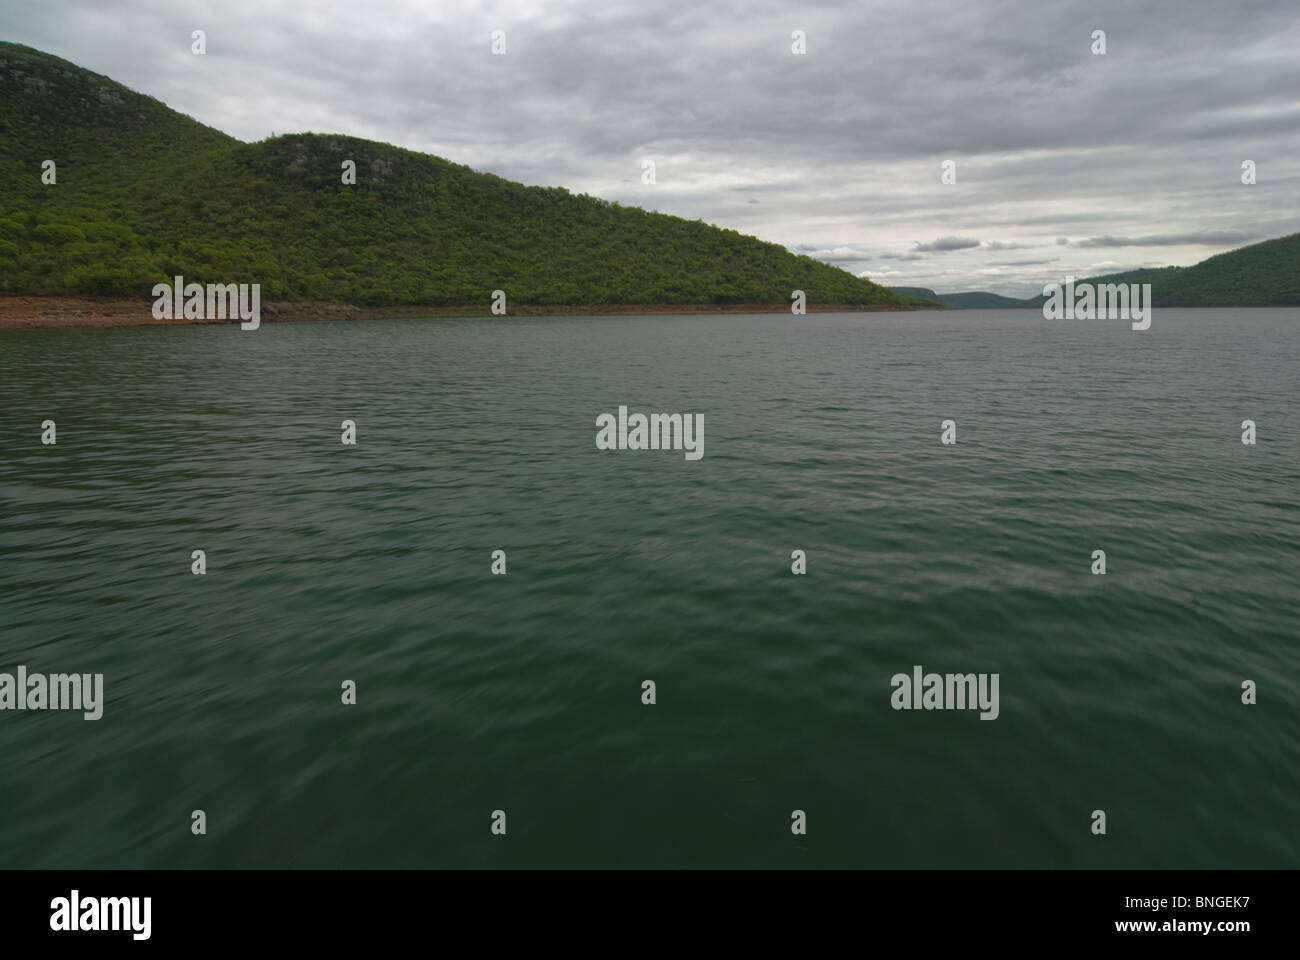 Motion blur of water with tree covered landmass and stormy clouds. Boat ride on Lake Jozini, Phongolo River, Kwazulu-Natal, South Africa. Stock Photo